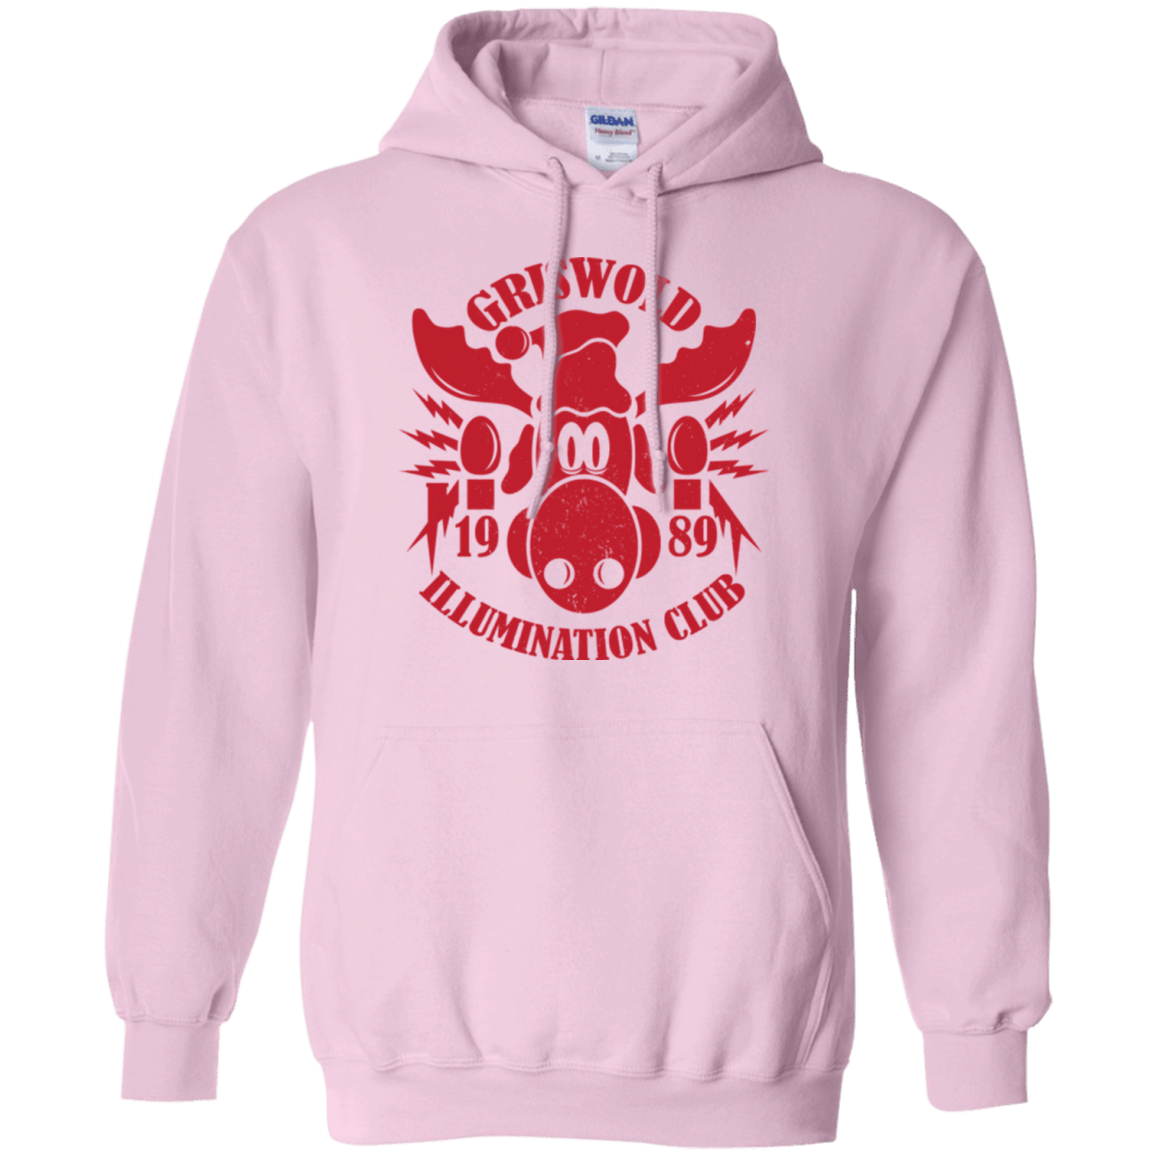 Sweatshirts Light Pink / Small Griswold Illumination Club Pullover Hoodie